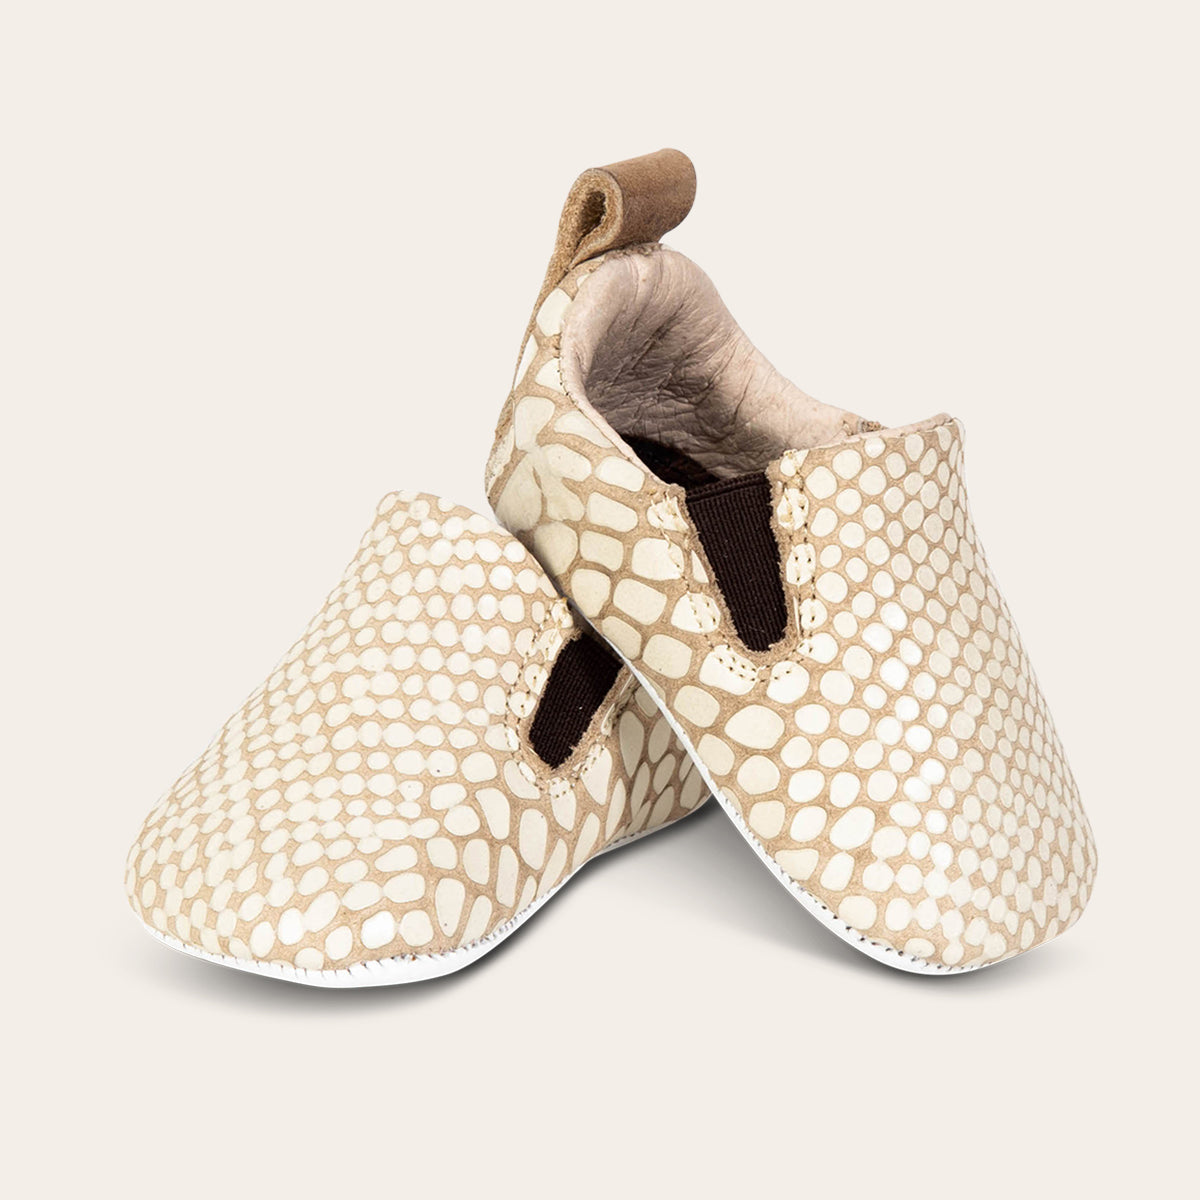 front view showing heel pull tab and side elastic panel on FREEBIRD infant baby kicks white snake leather shoe